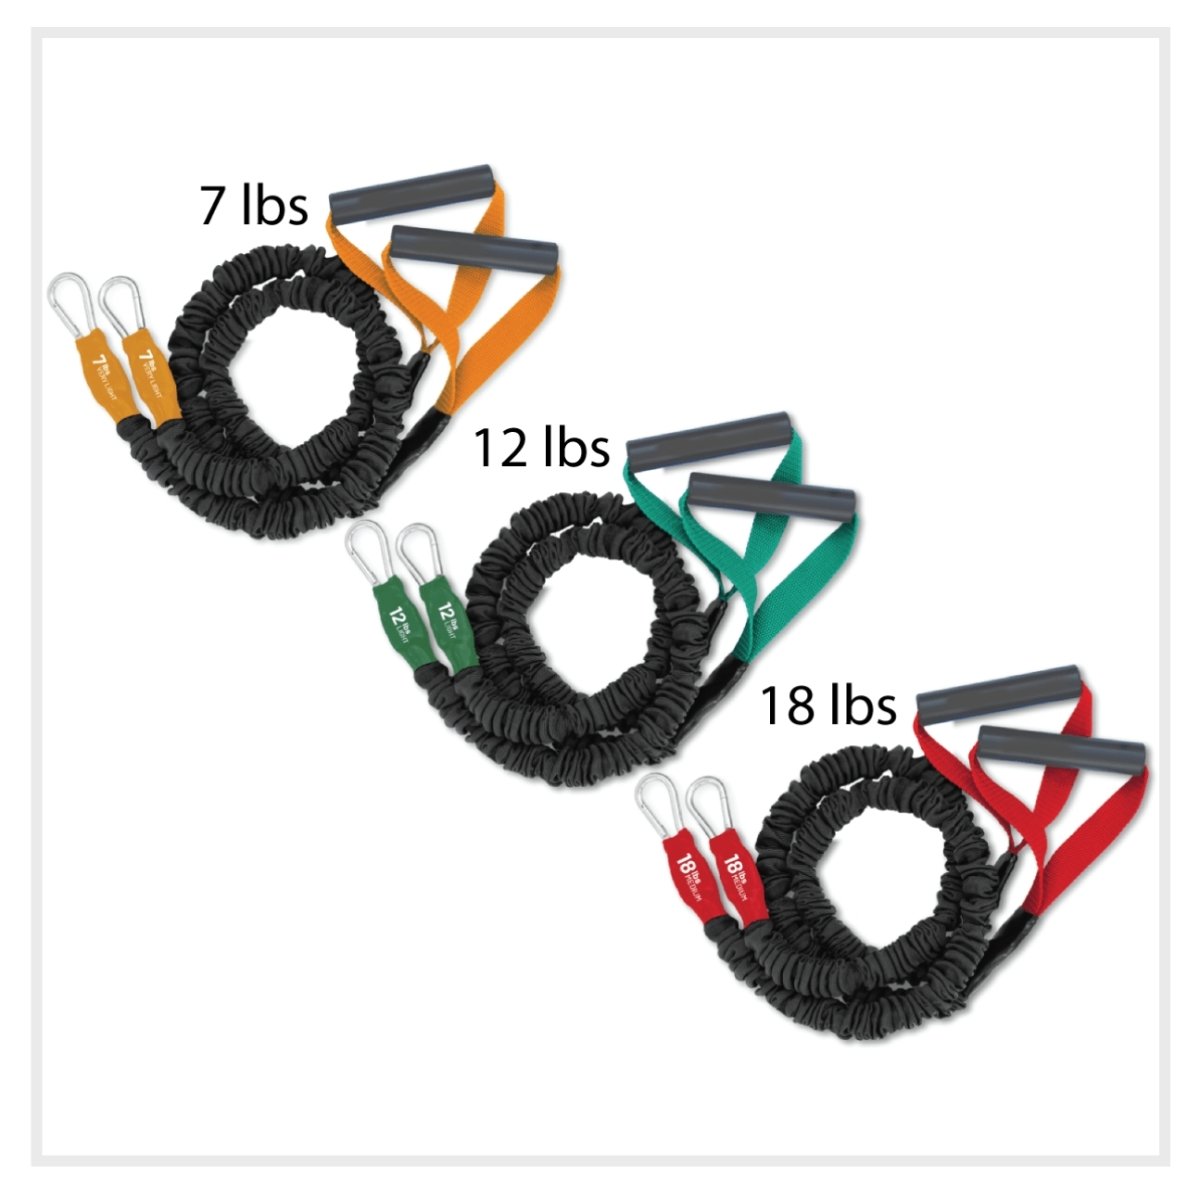 American Made Covered Resistance tube sheathed resistance bands shoulder and arm exercise bands at home made in america best quality bungee cord band great for crossift, weight lifting, use with your weight set for upper body muscle tone and building